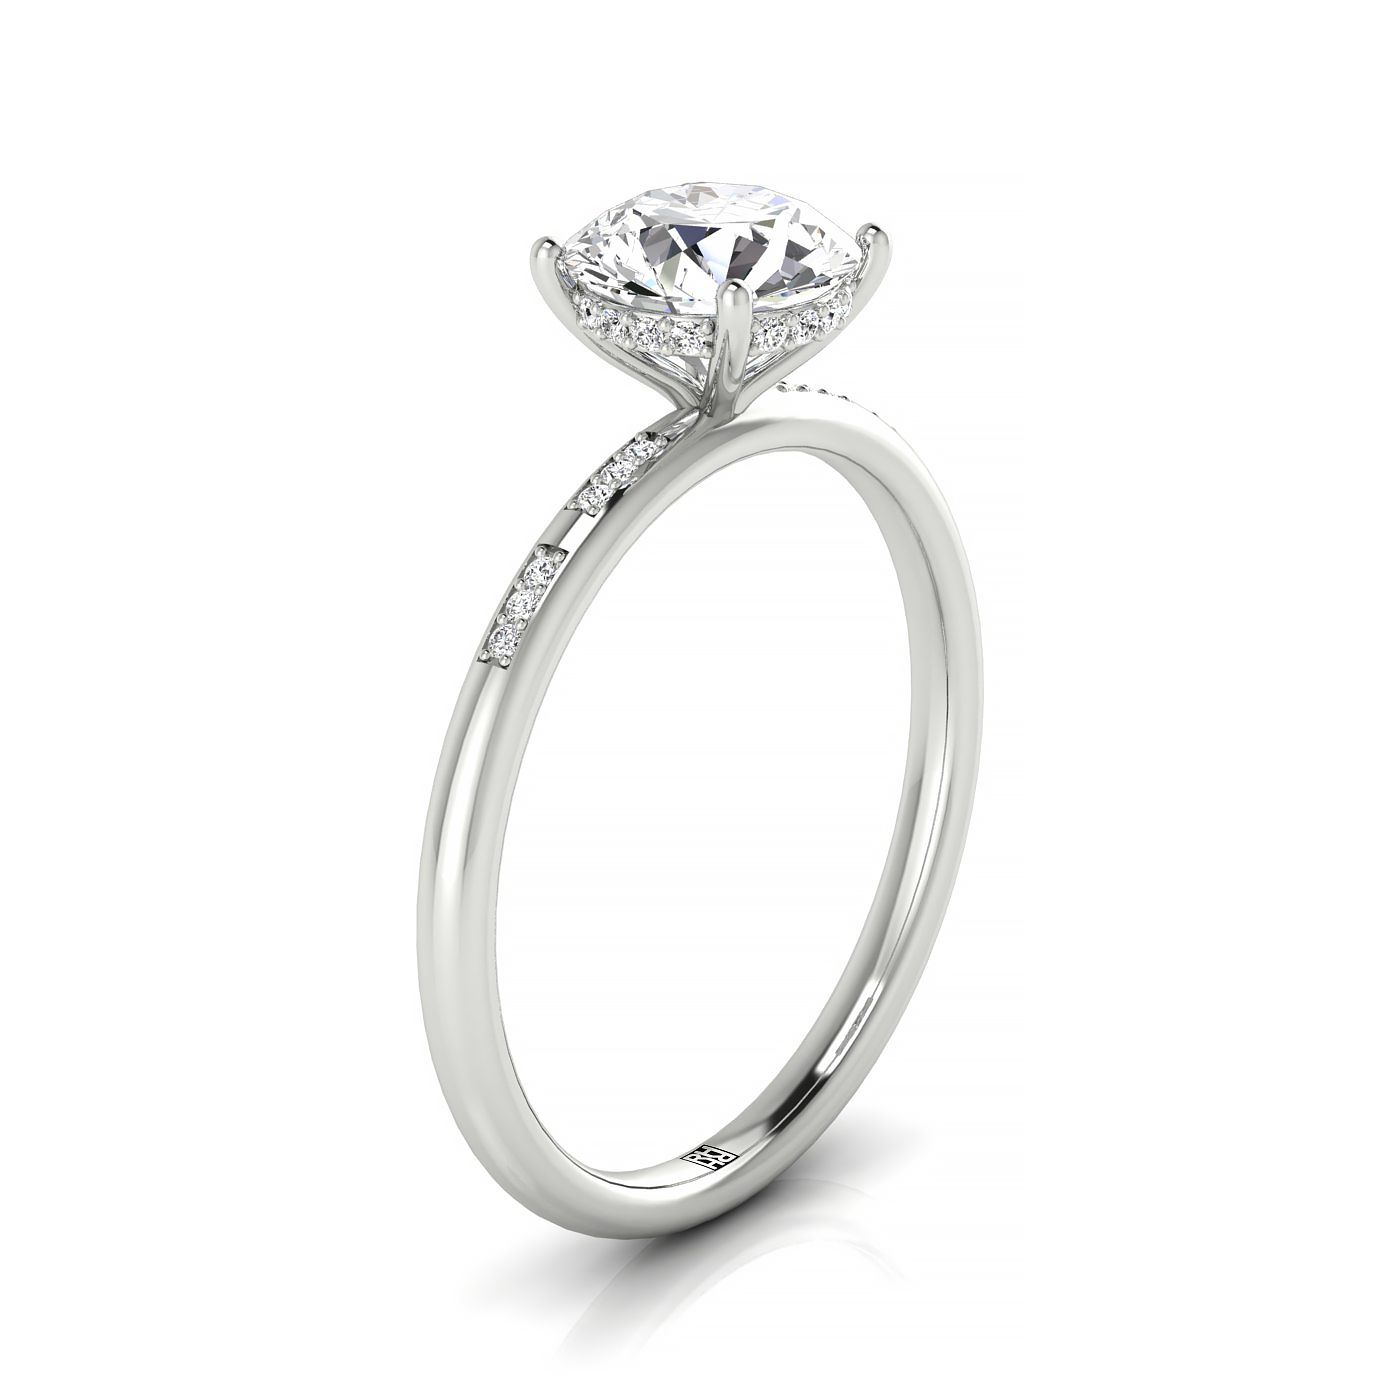 18kw Round Engagement Ring With High Hidden Halo With 26 Prong Set Round Diamonds